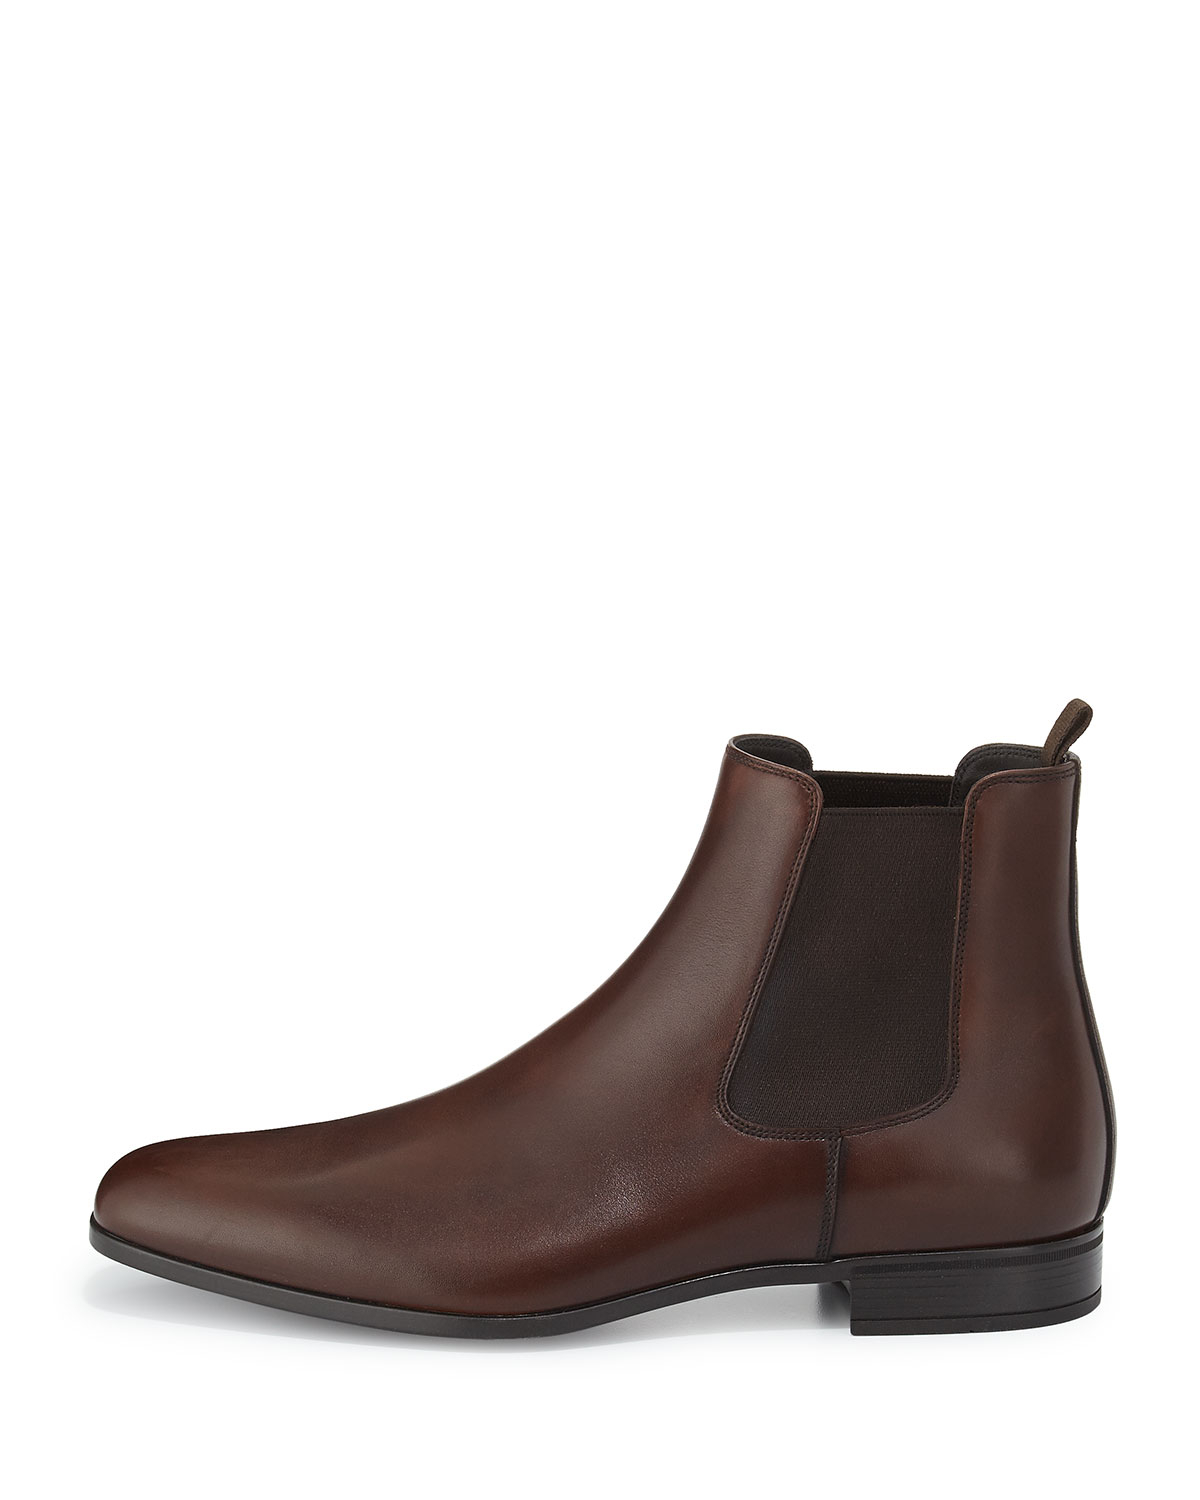 Prada Leather Chelsea Rubber-bottom Boot in Brown | Lyst